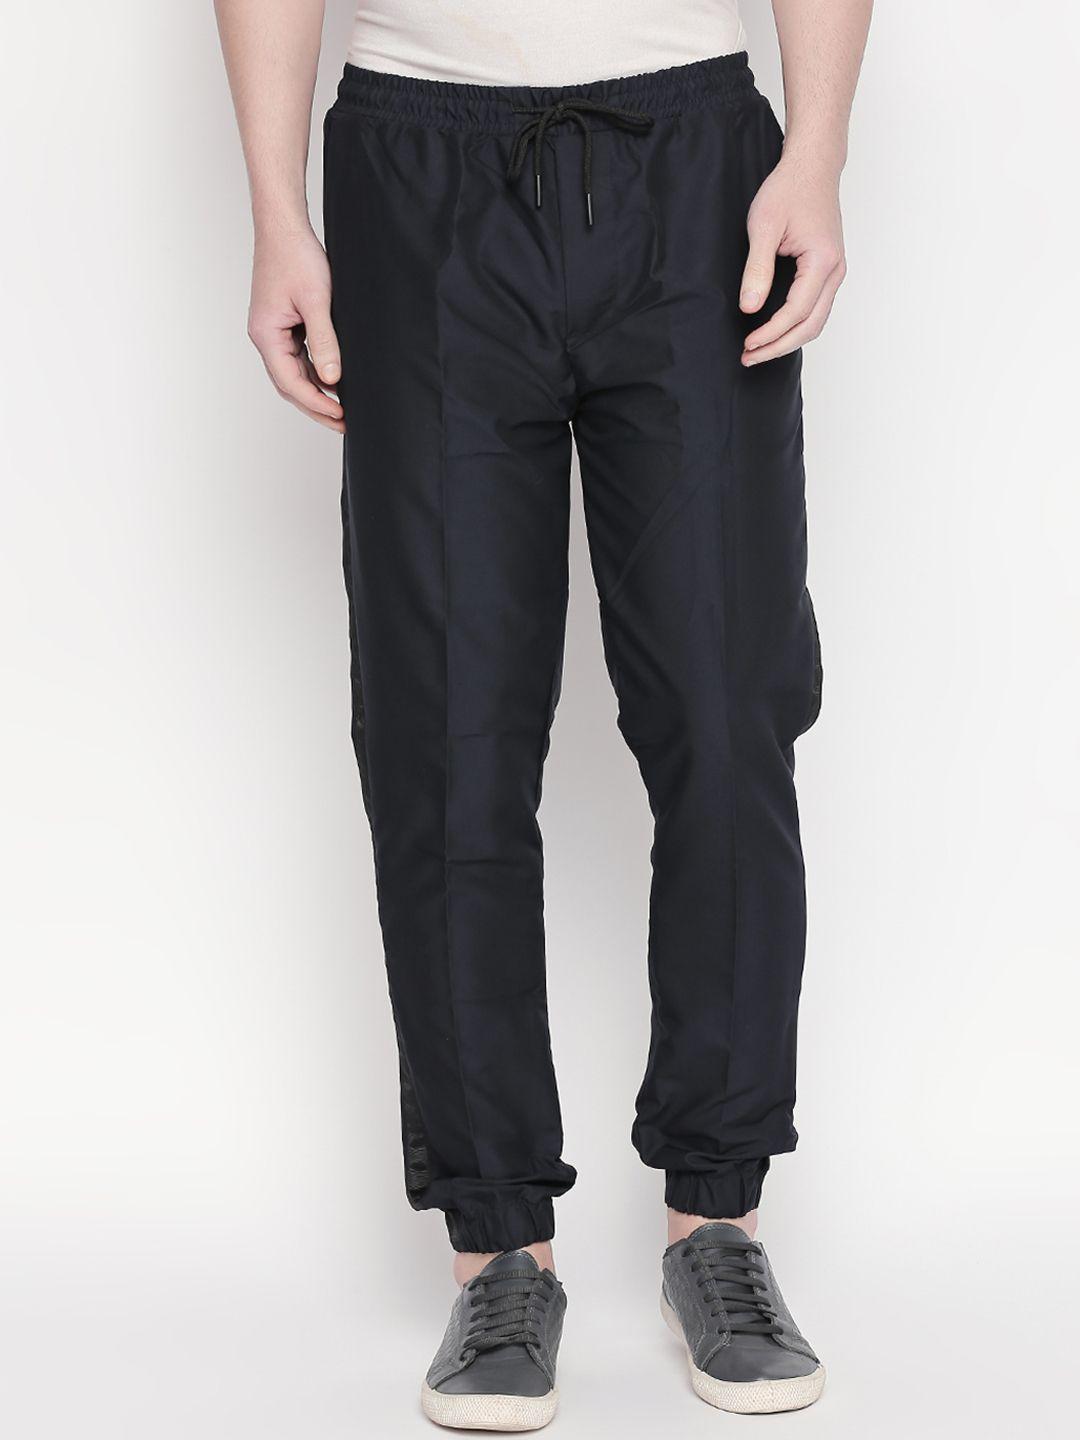 kenneth-cole-men-black-solid-slim-fit-outdoor-joggers